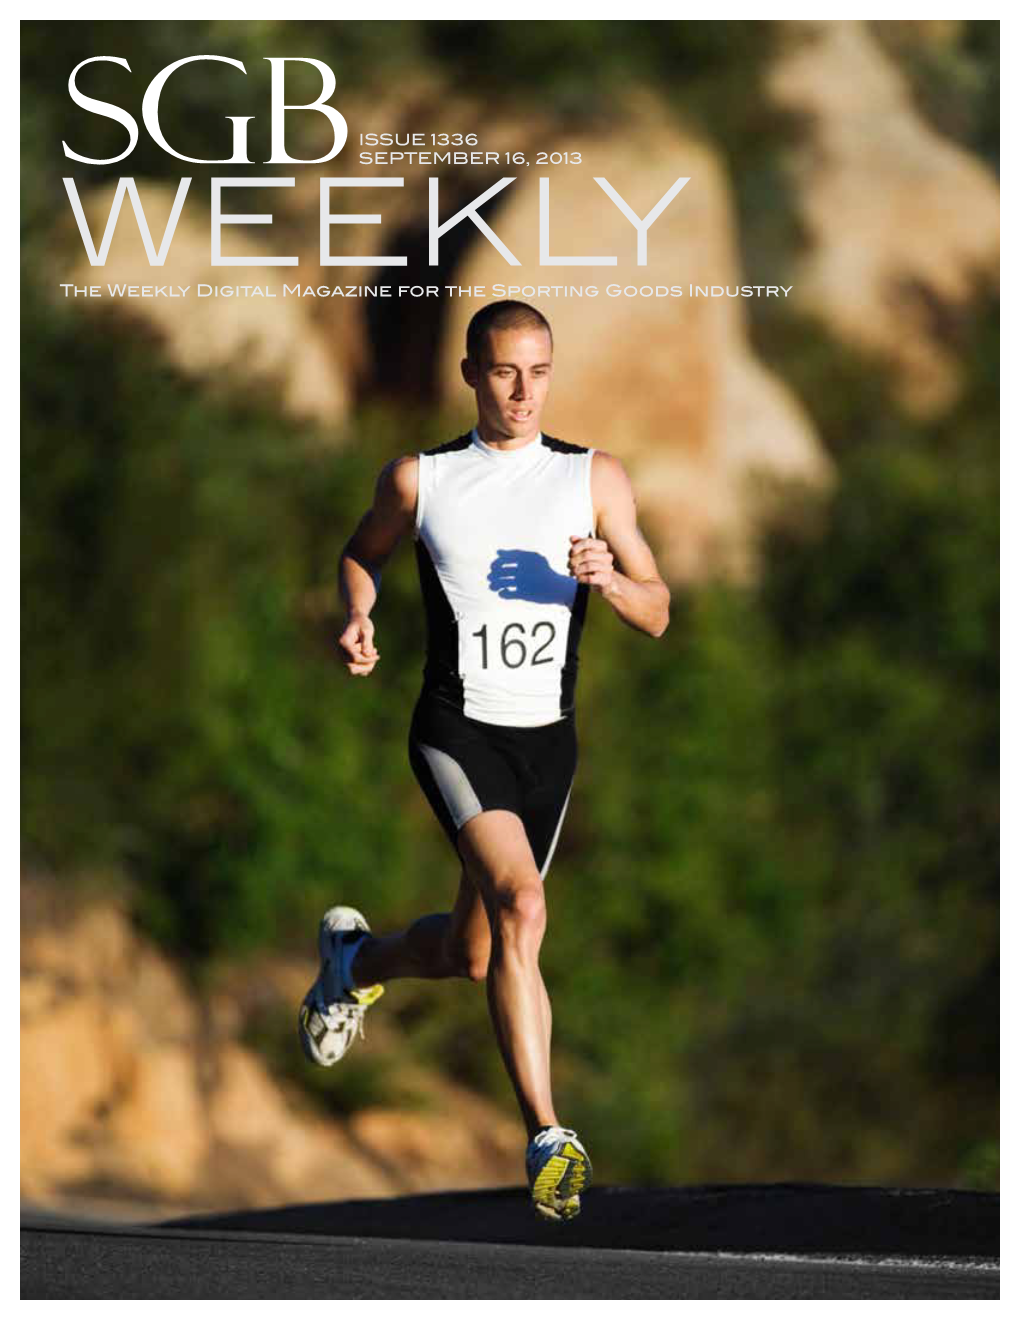 The Weekly Digital Magazine for the Sporting Goods Industry WE MADE IT EASY to SELL YOUR SOLE